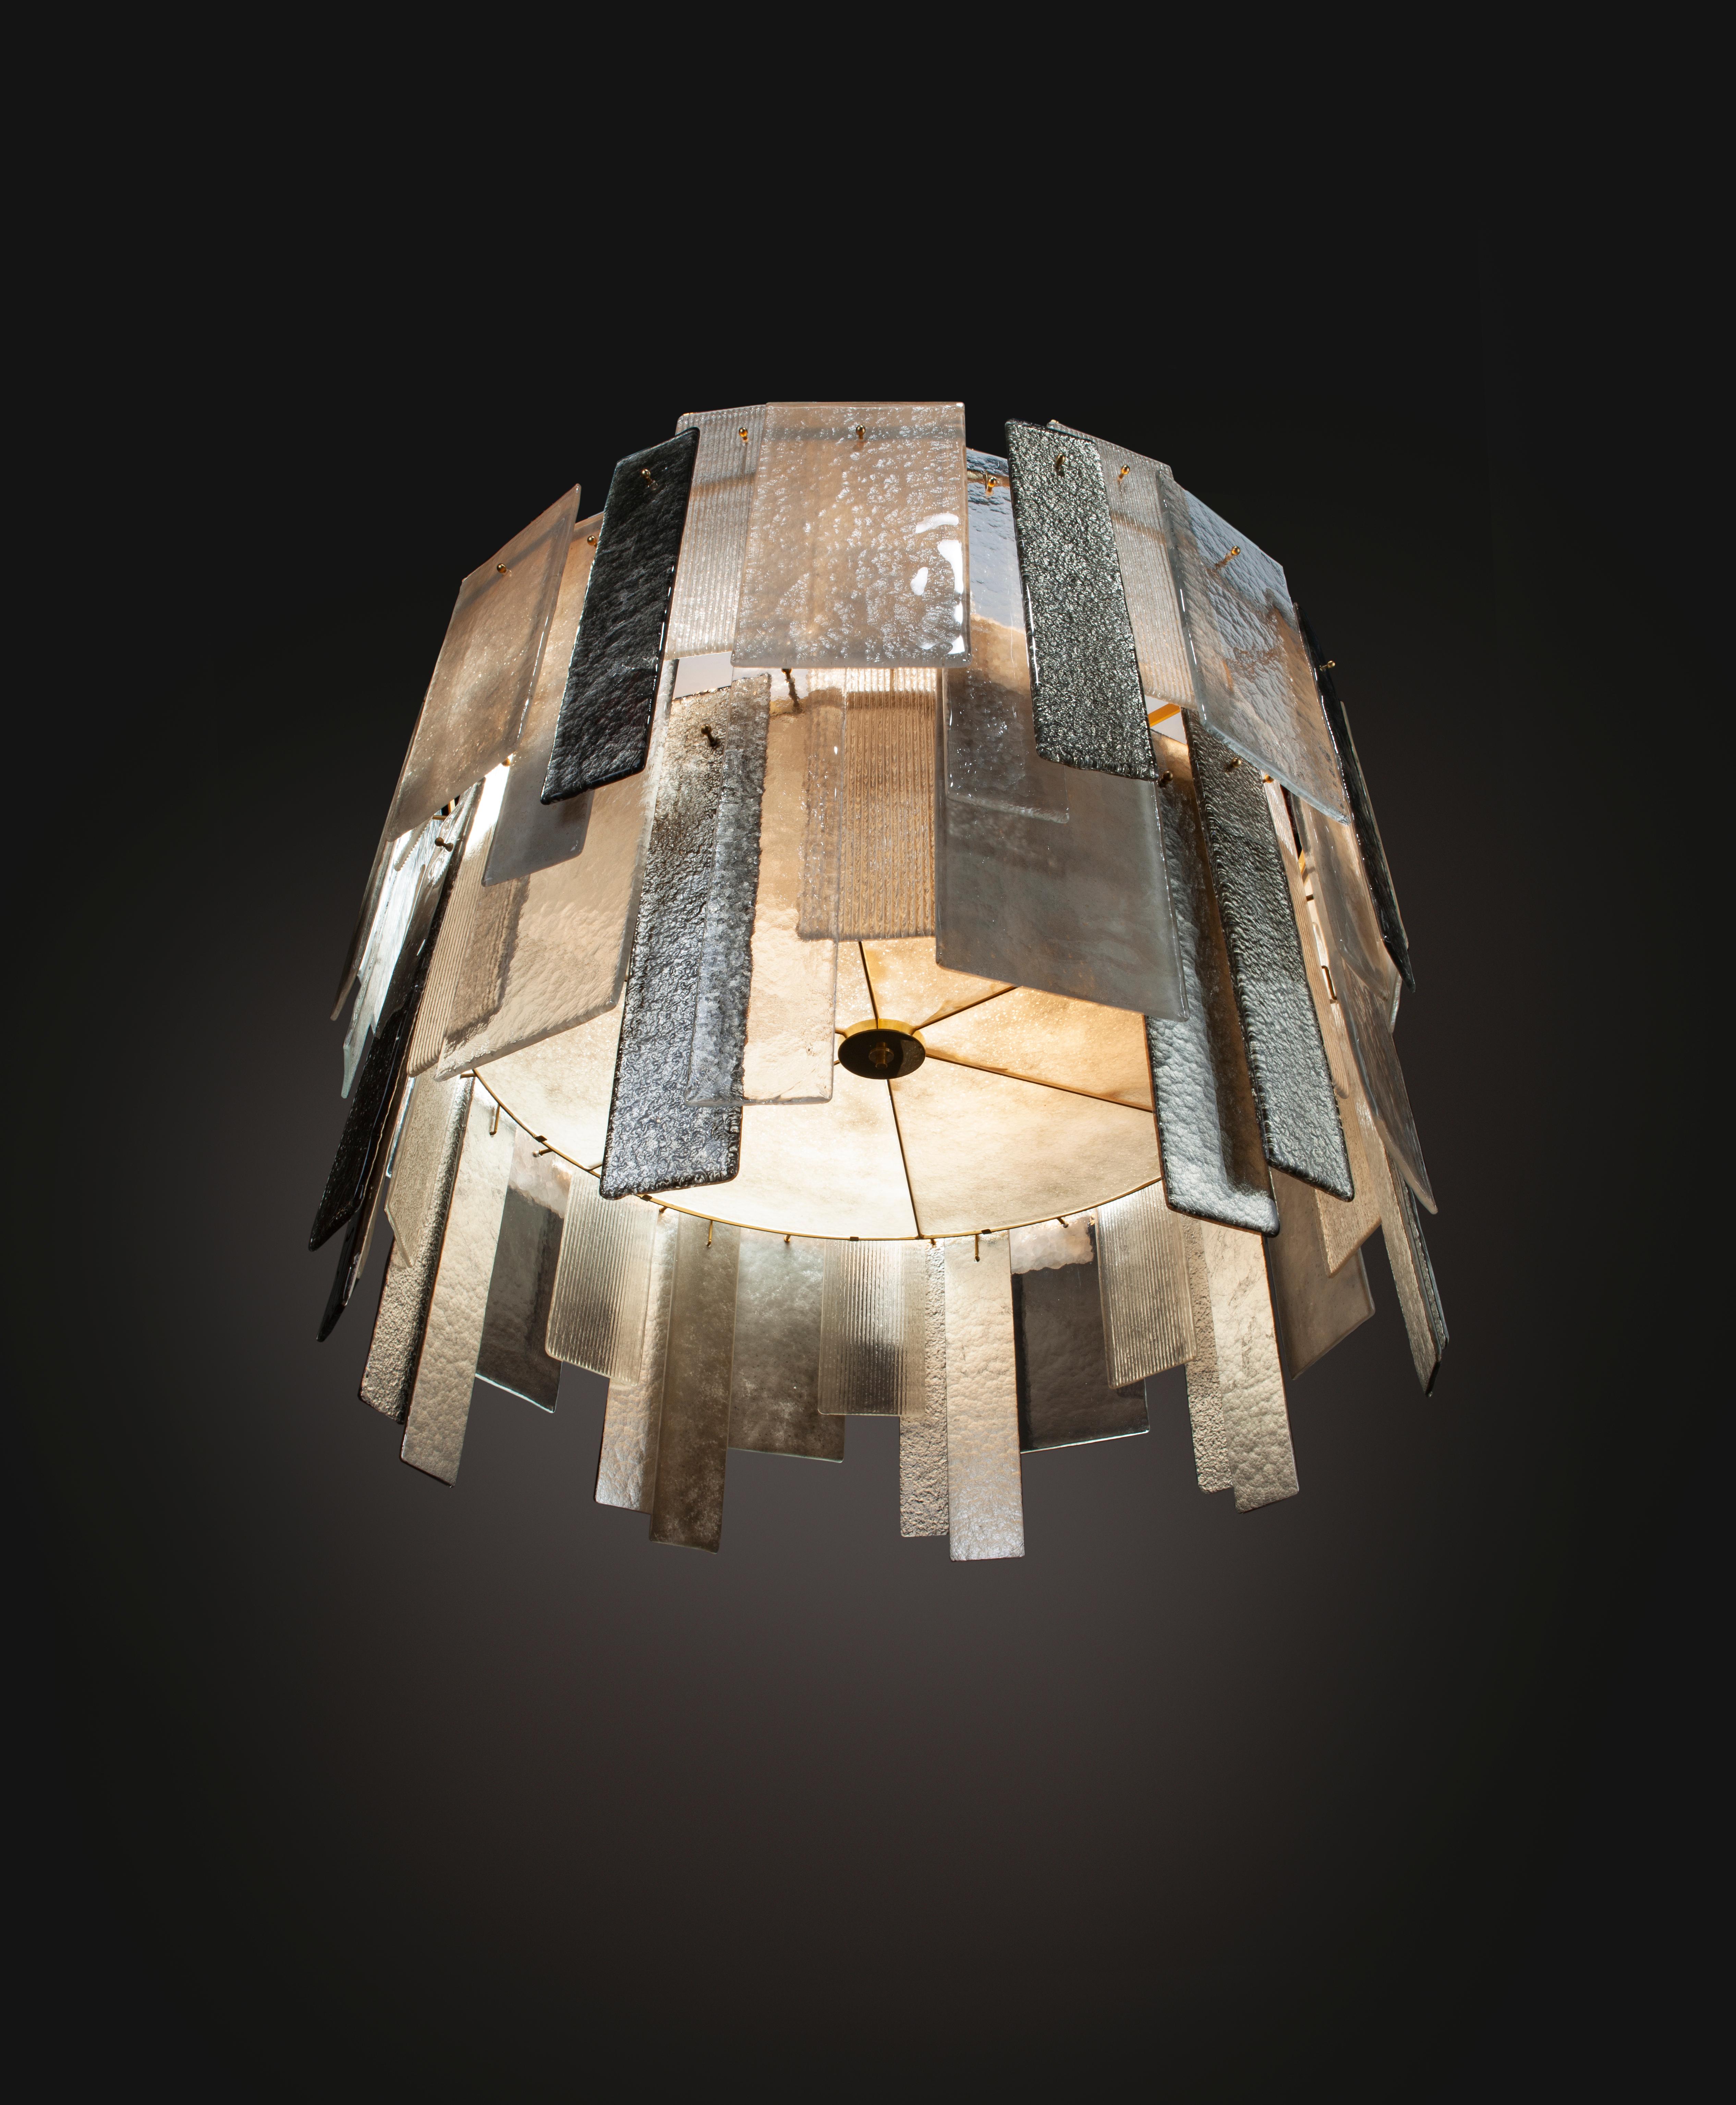 A version of our popular Stromboli chandelier, the Salina uses the same hand-floated Murano glass panels on a circular gold powder coated frame. The height is reduced compared to the Stromboli making it more suitable for rooms with lower ceilings,